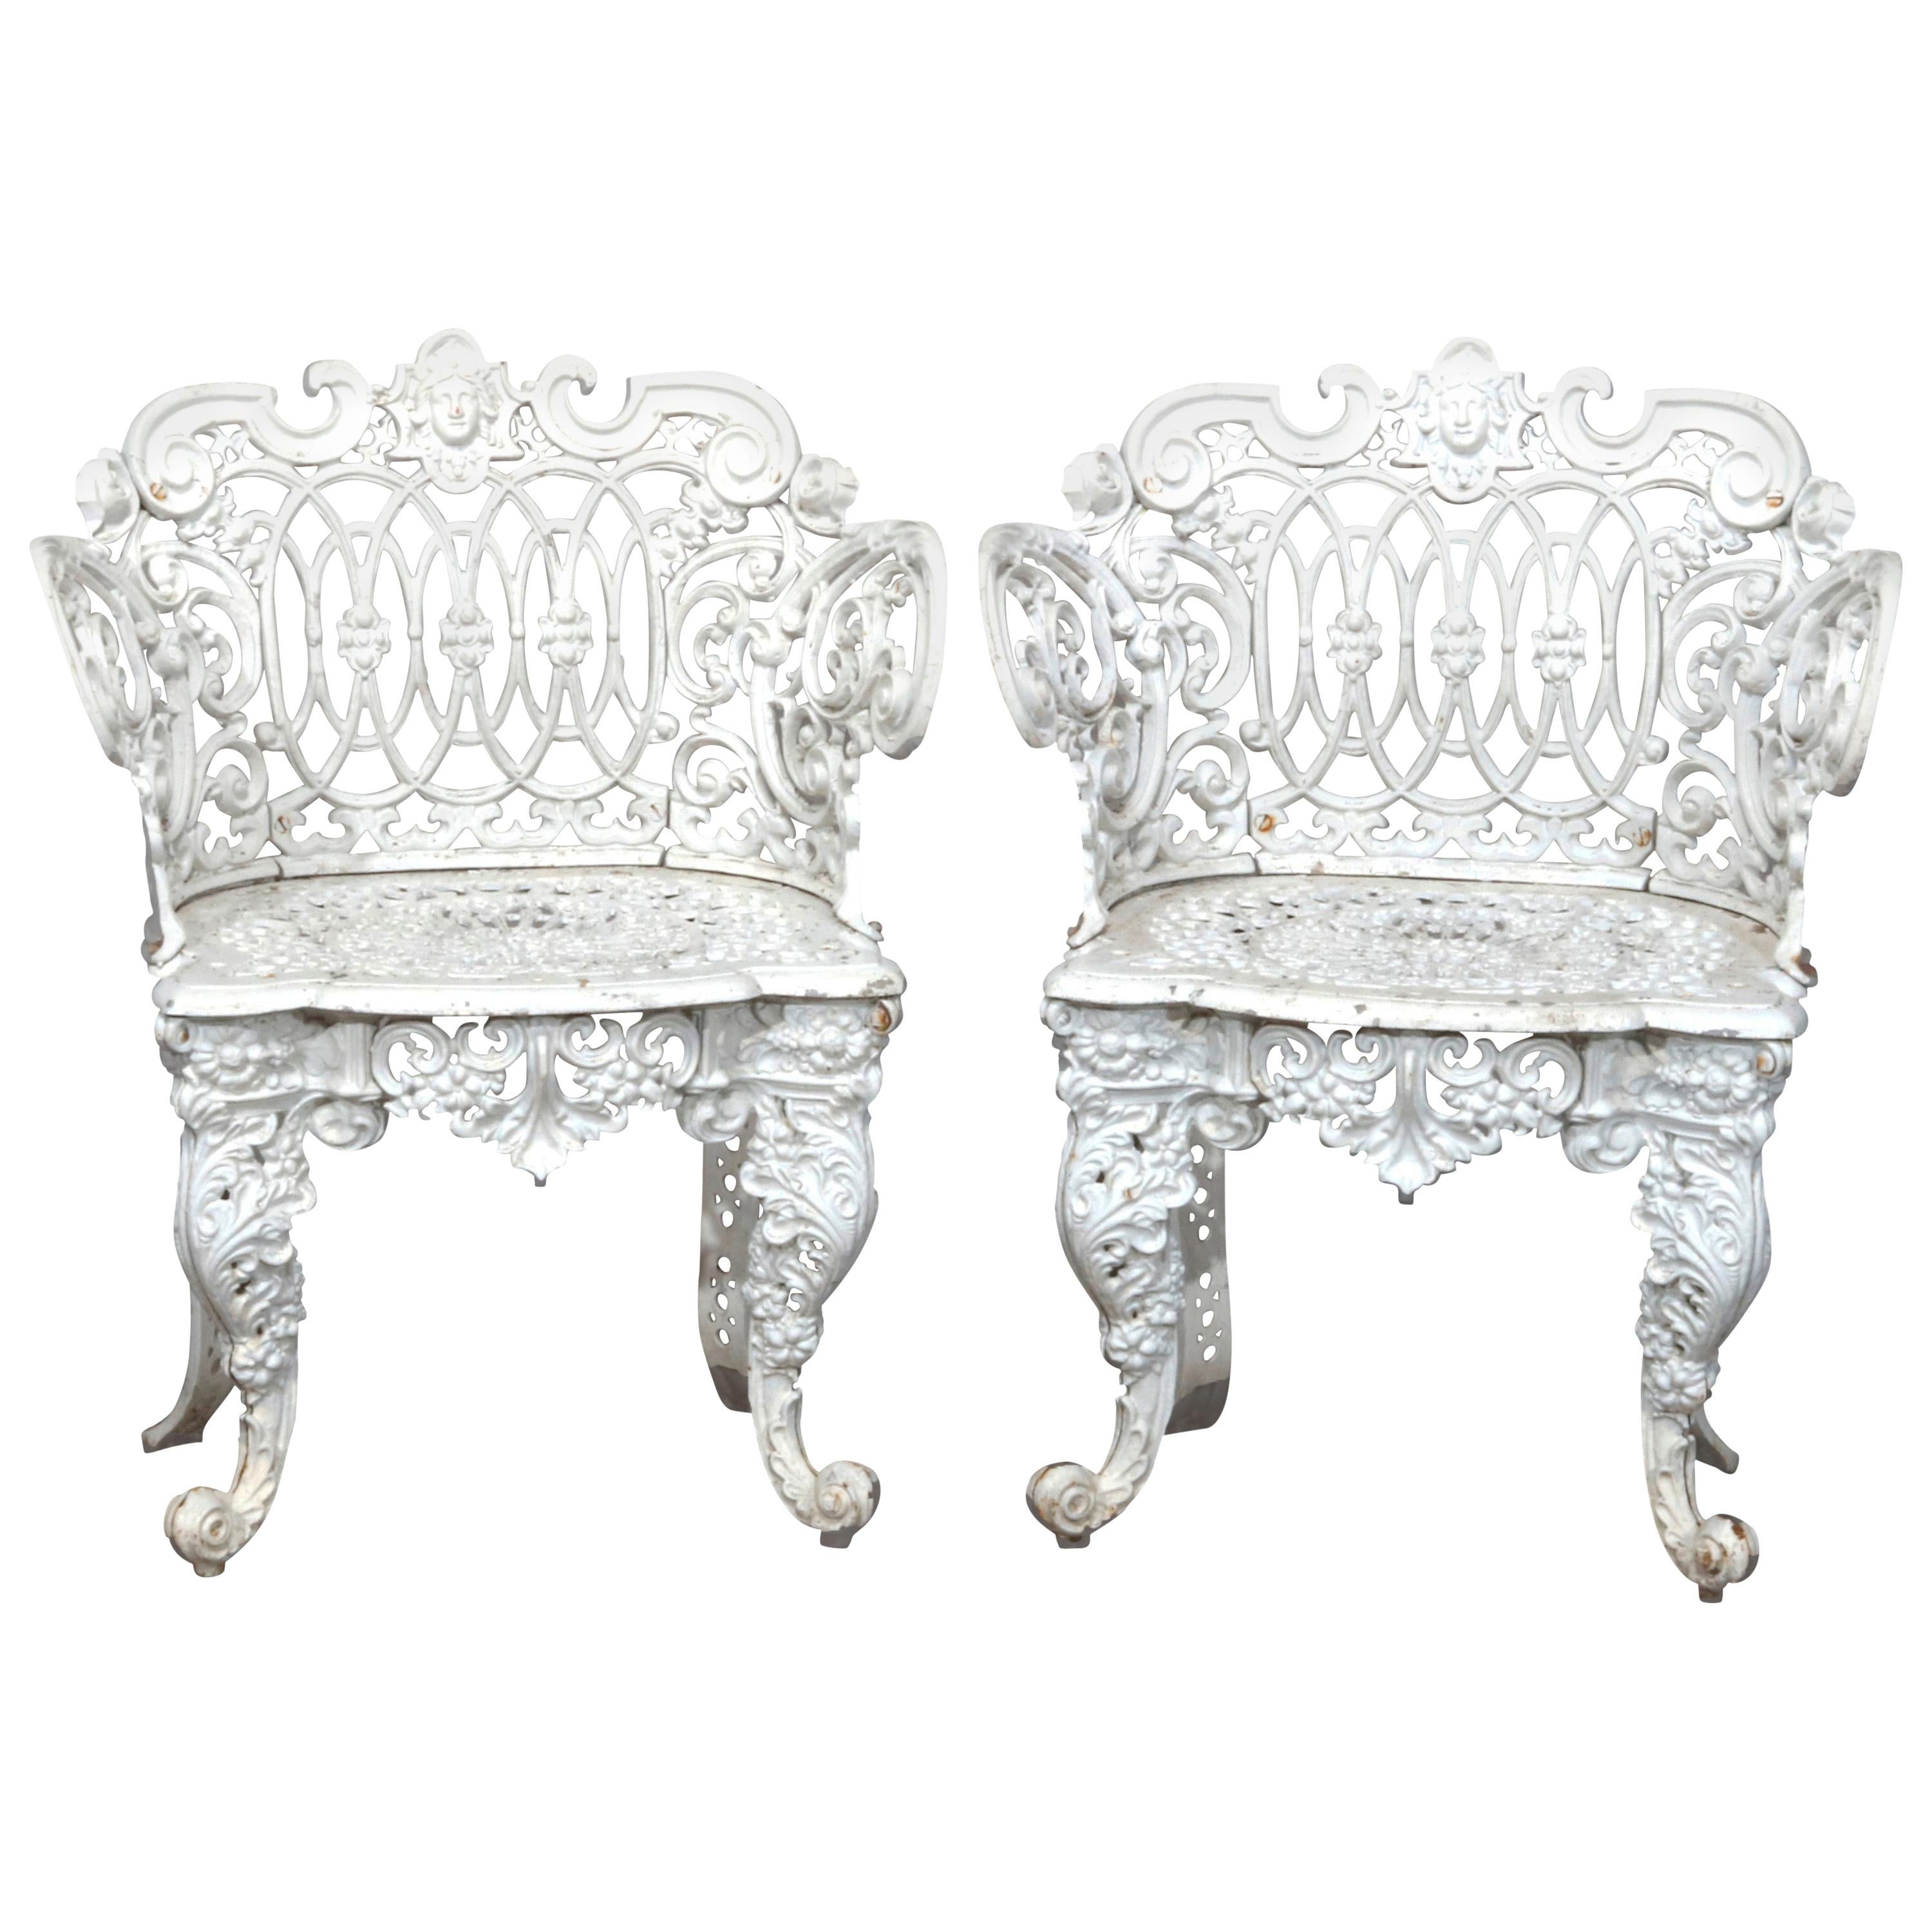 Antique Pair of Figural Cast Iron Rococo Garden Chairs, Painted White